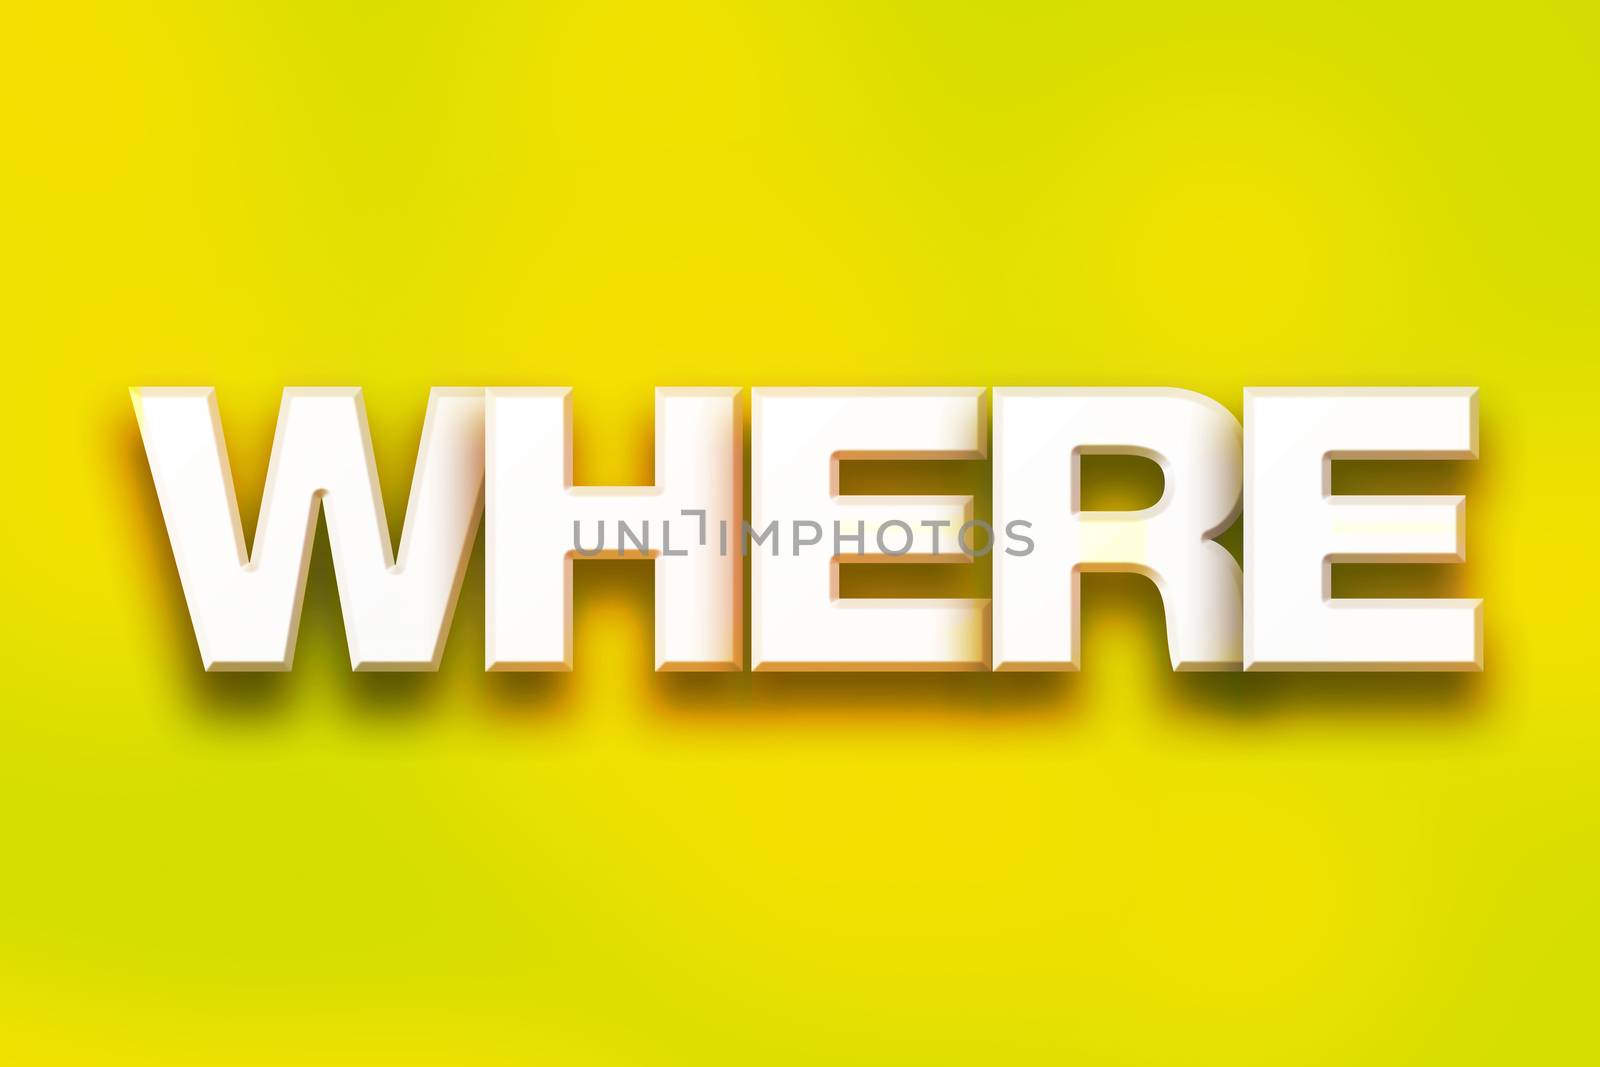 The word "Where" written in white 3D letters on a colorful background concept and theme.